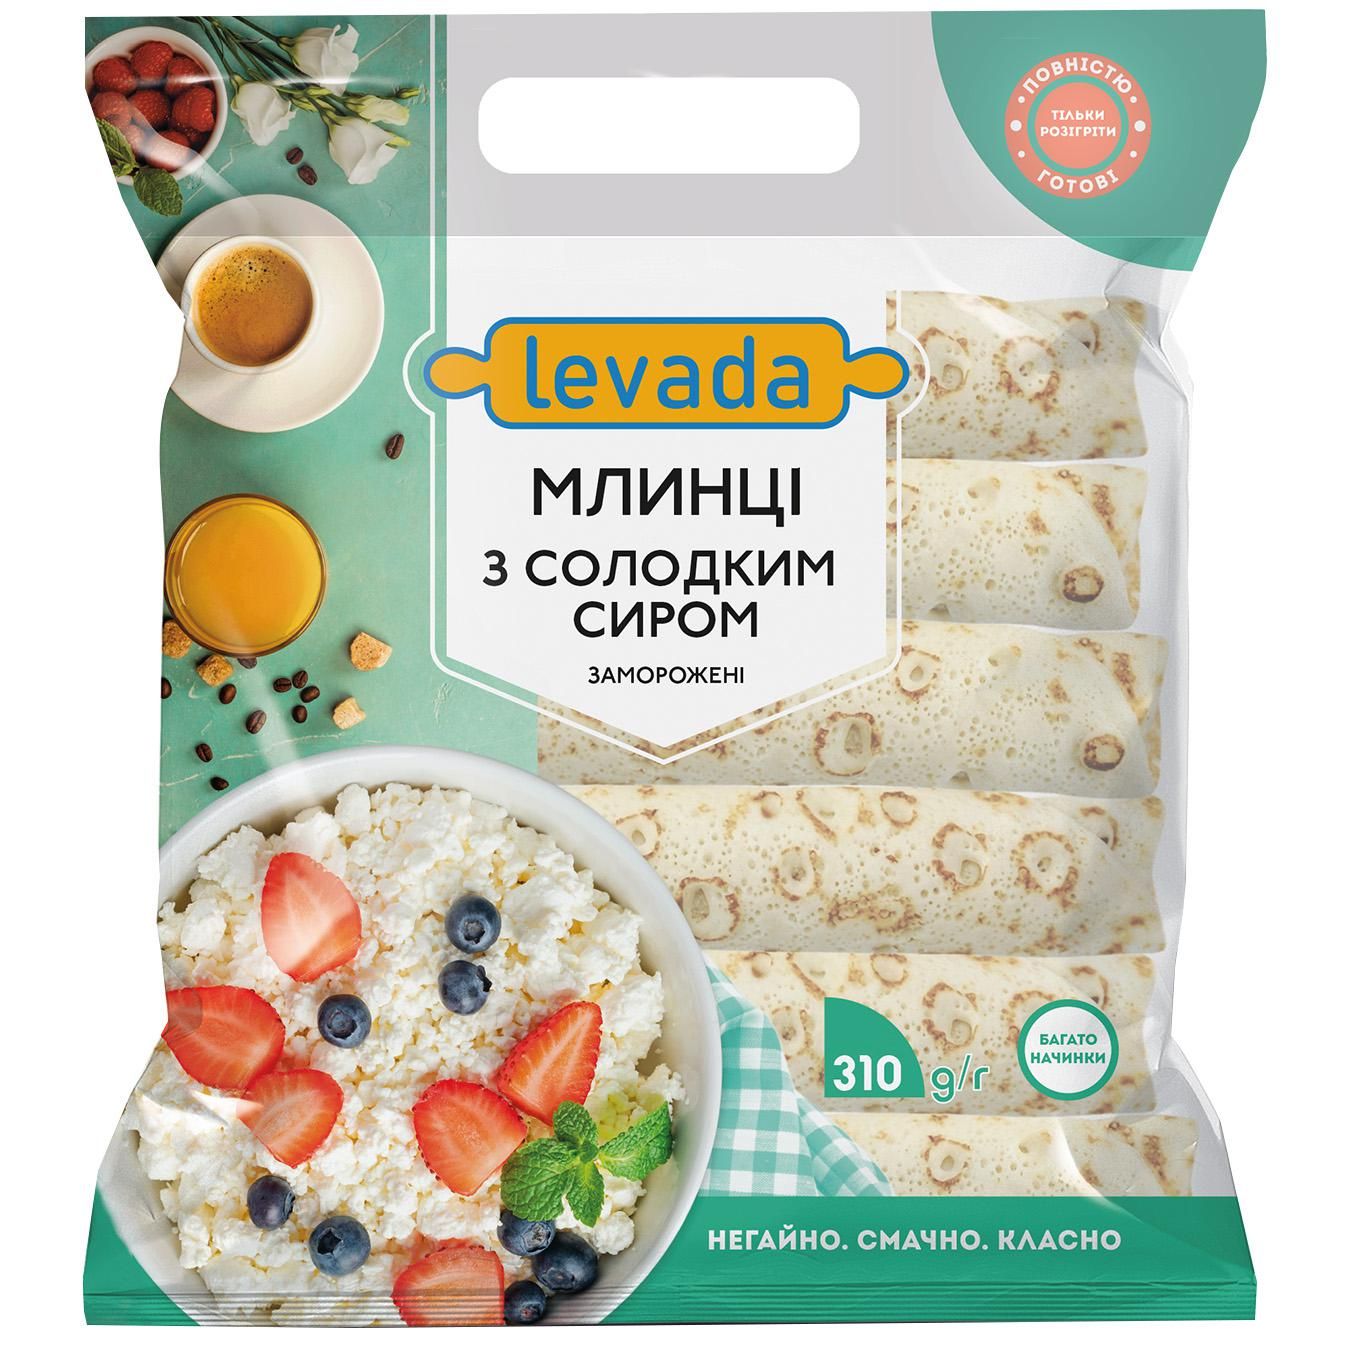 Levada pancakes with sweet cheese 310g